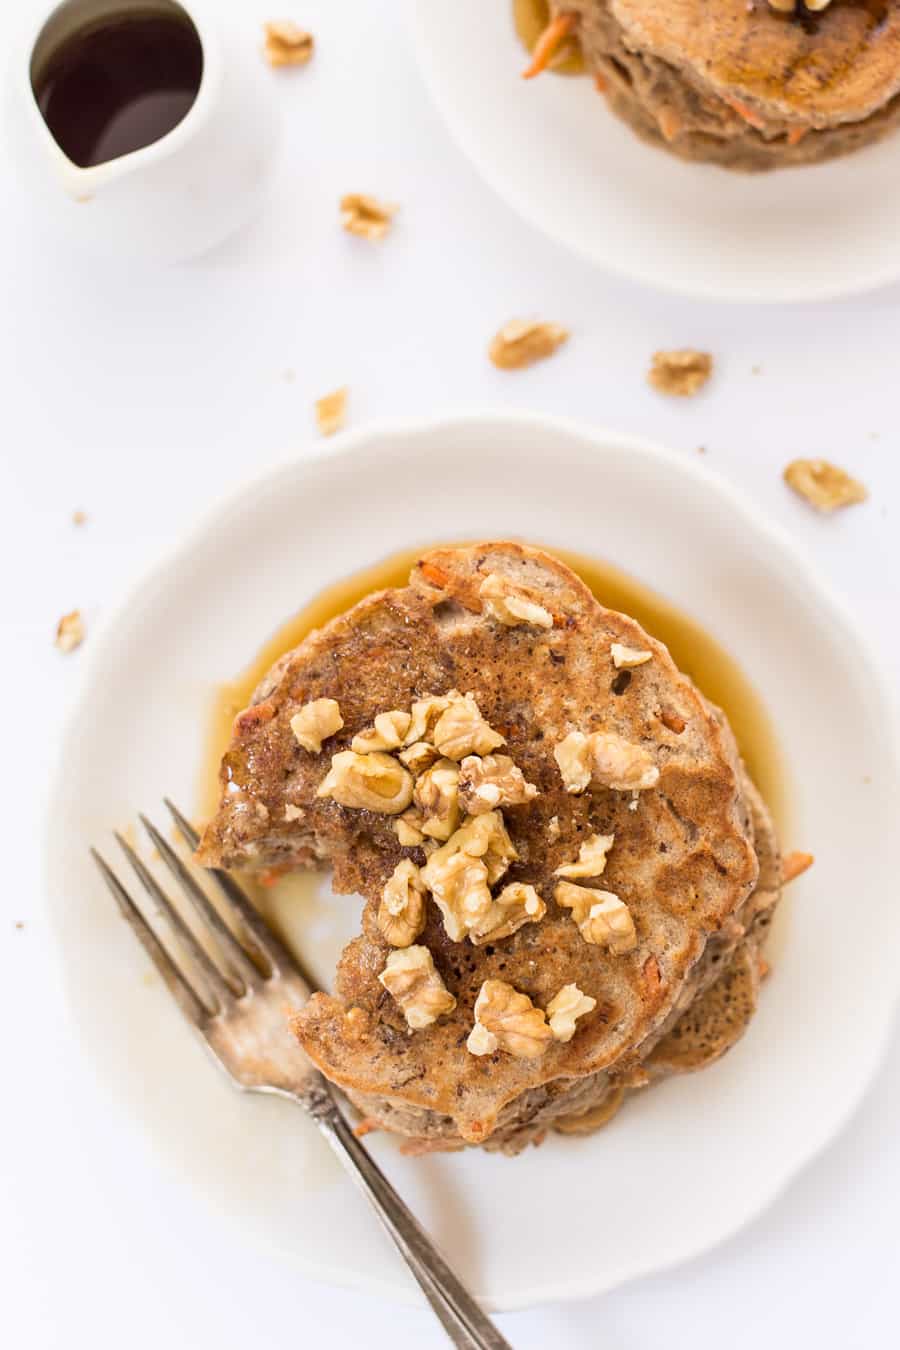 These healthy carrot cake pancakes are packed with nutritious ingredients like quinoa, almond, flax and coconut! The perfect way to kickstart your day with a breakfast that tastes like dessert!